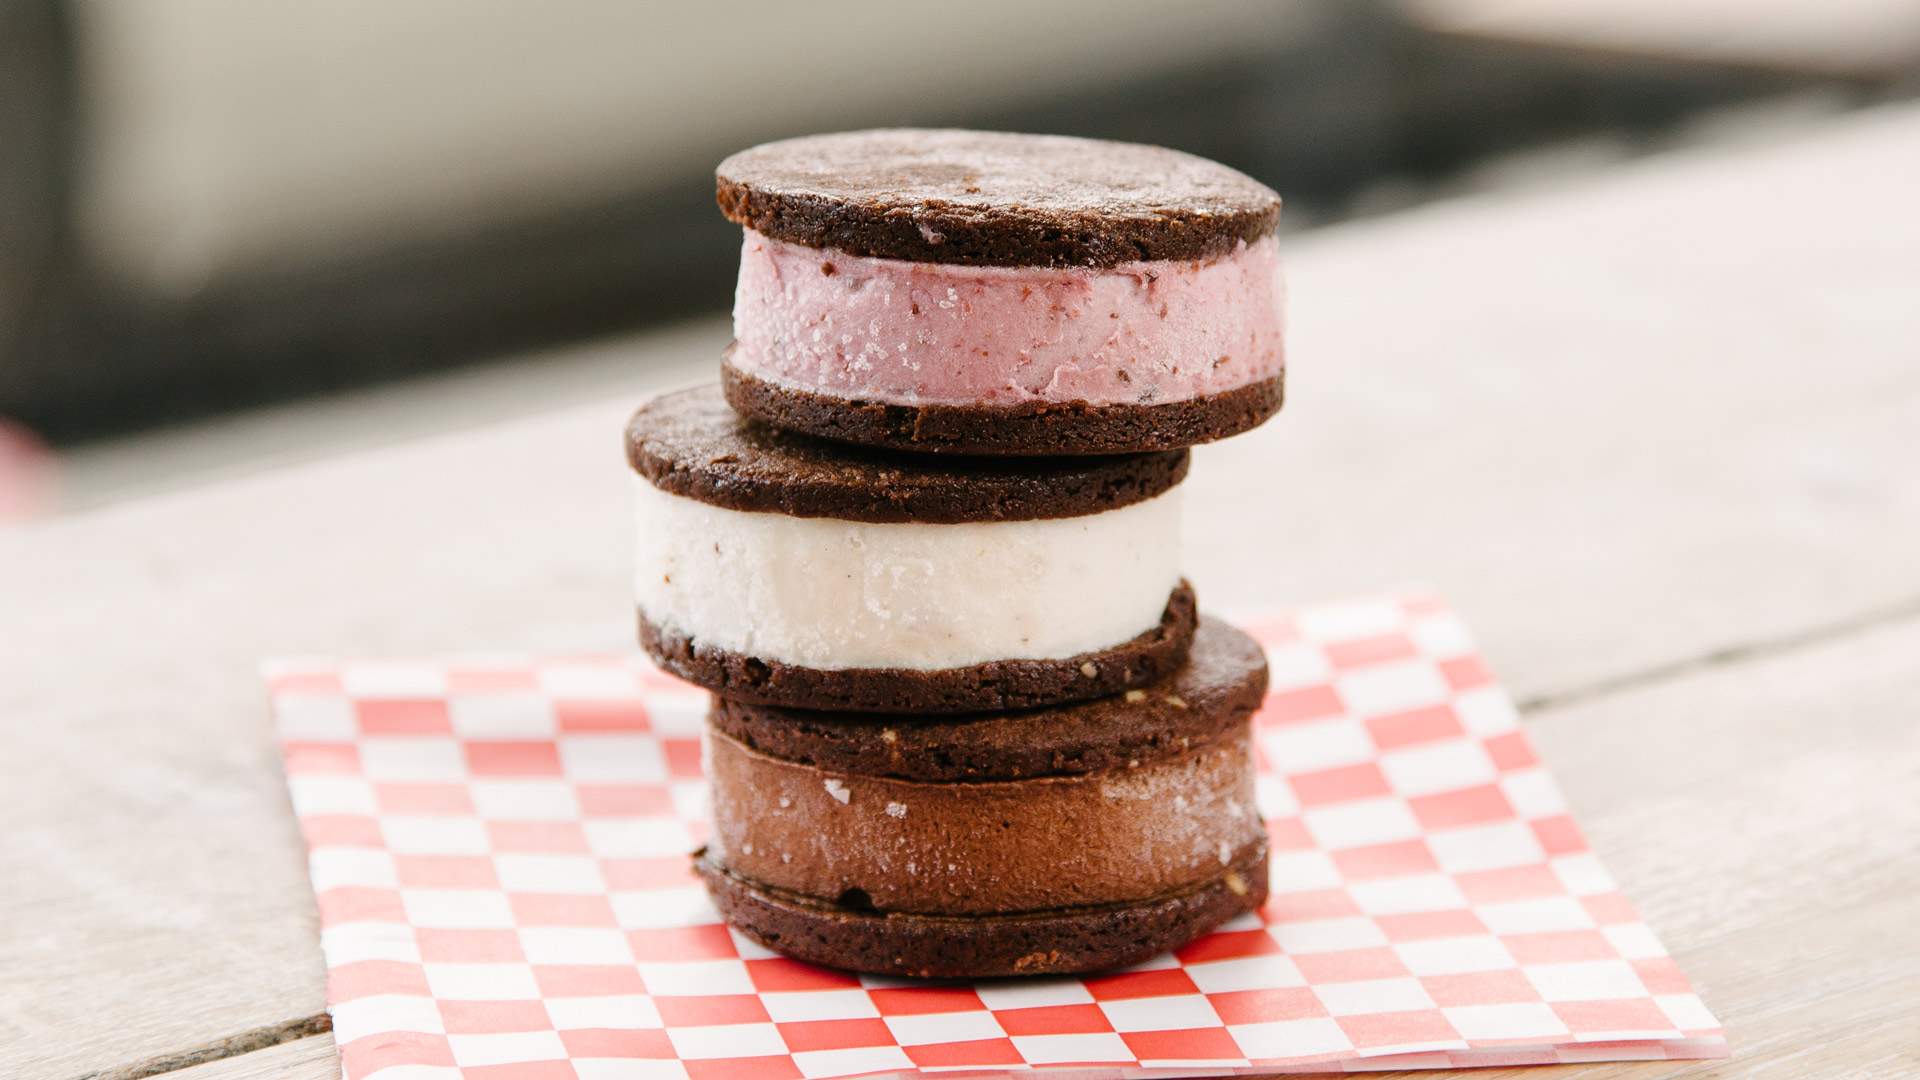 Lord of the Fries Has Launched a New Range of Vegan Ice Cream Sandwiches